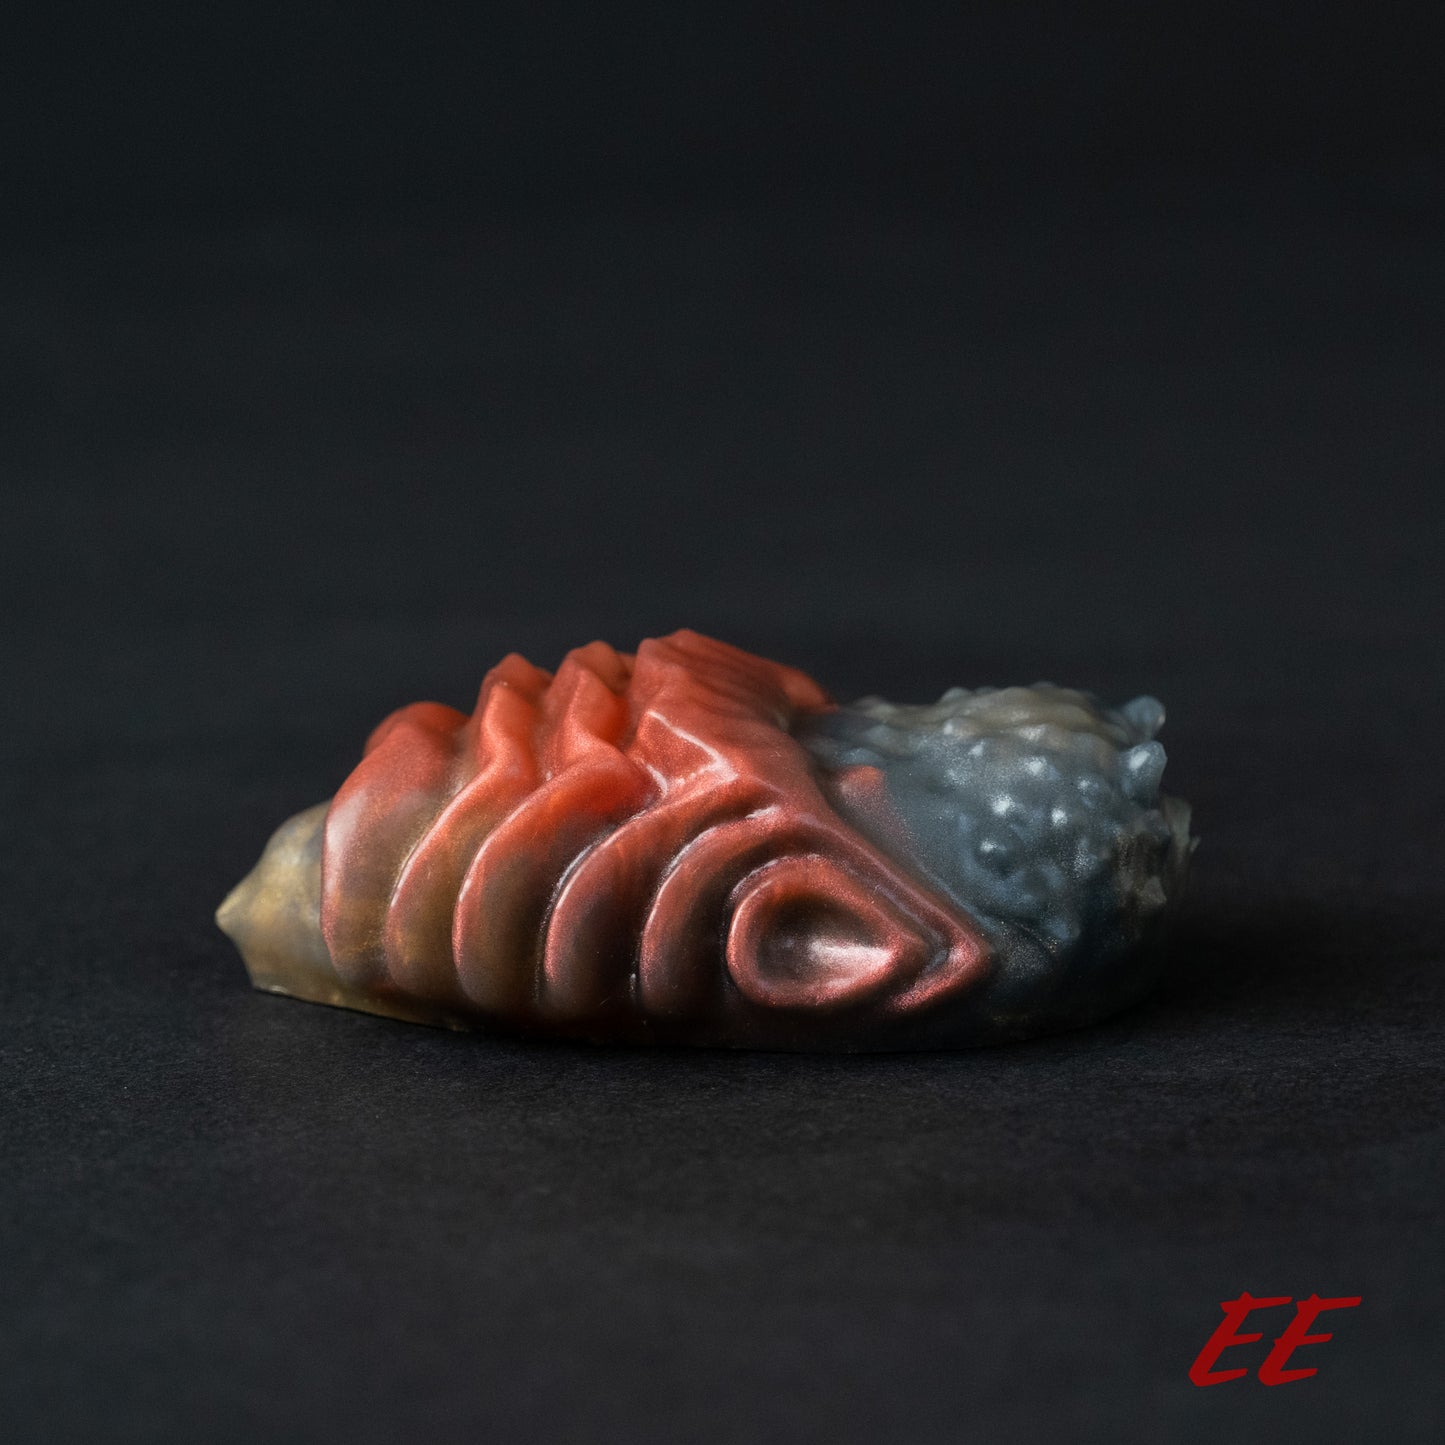 Edgar Silicone Grindable/Squishy - Shimmery Red/Black/Gold - Soft Firmness